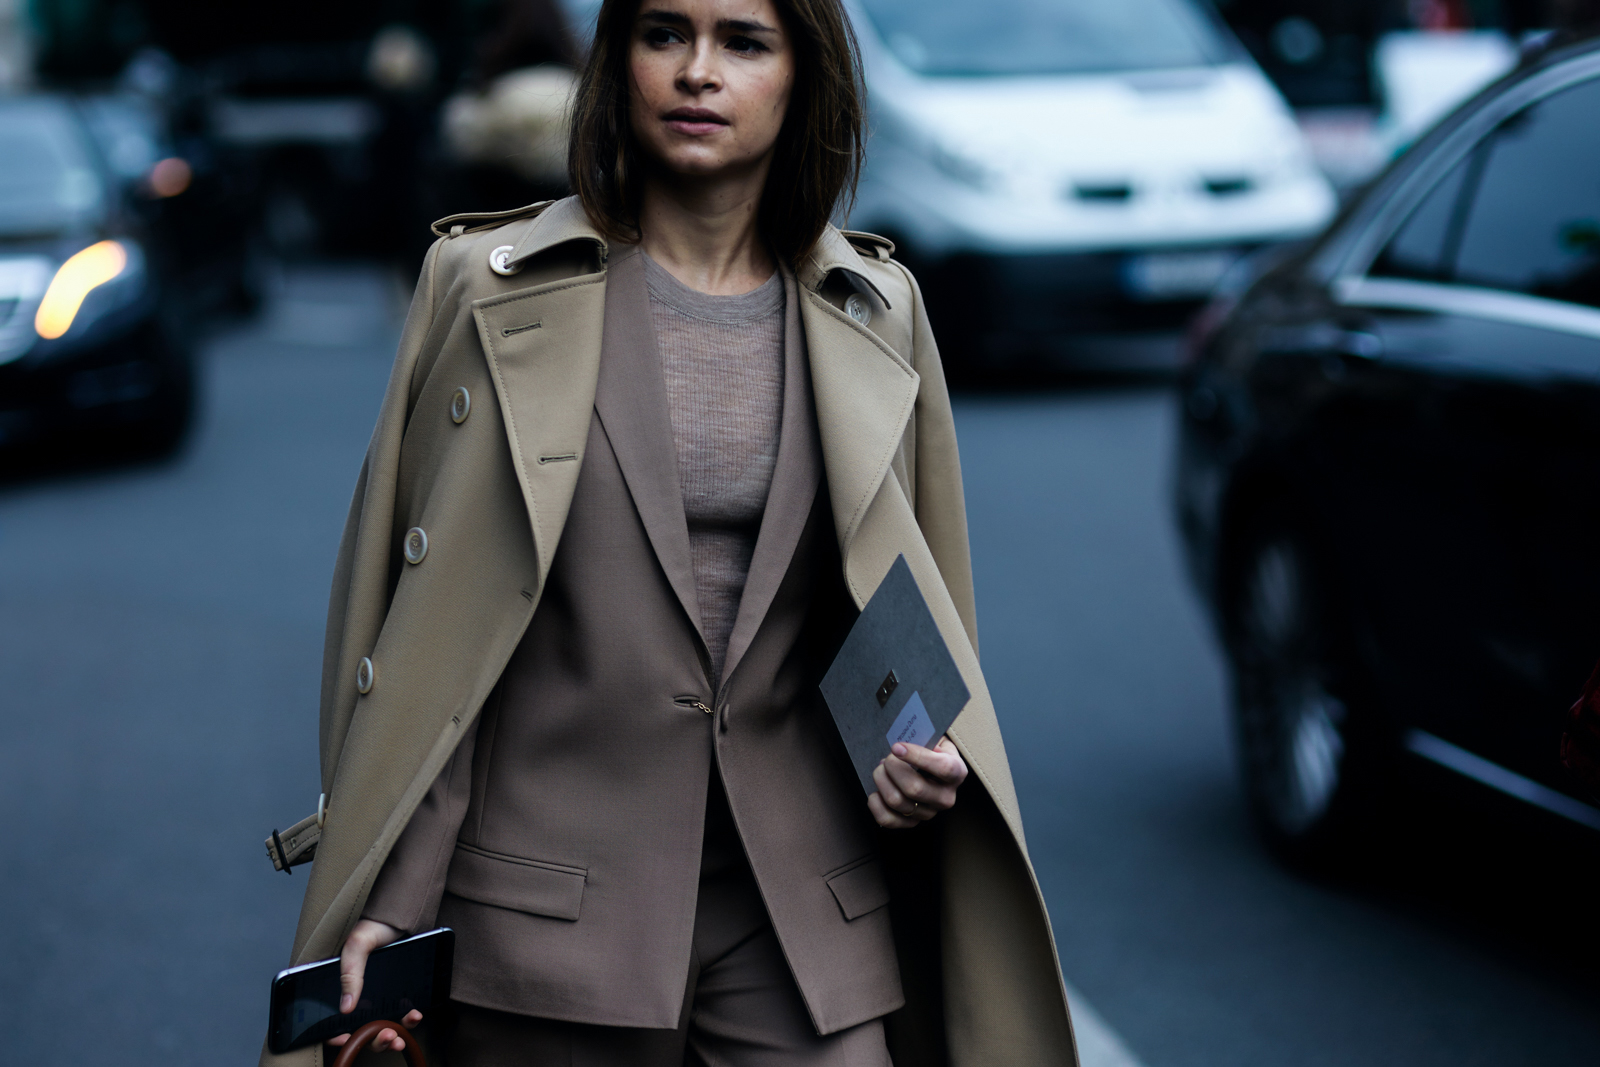 PFW Street Style: Mira Duma wearing a trench coat and a beige suit after the Stella McCartney Fall 2016 fashion show in Paris, France